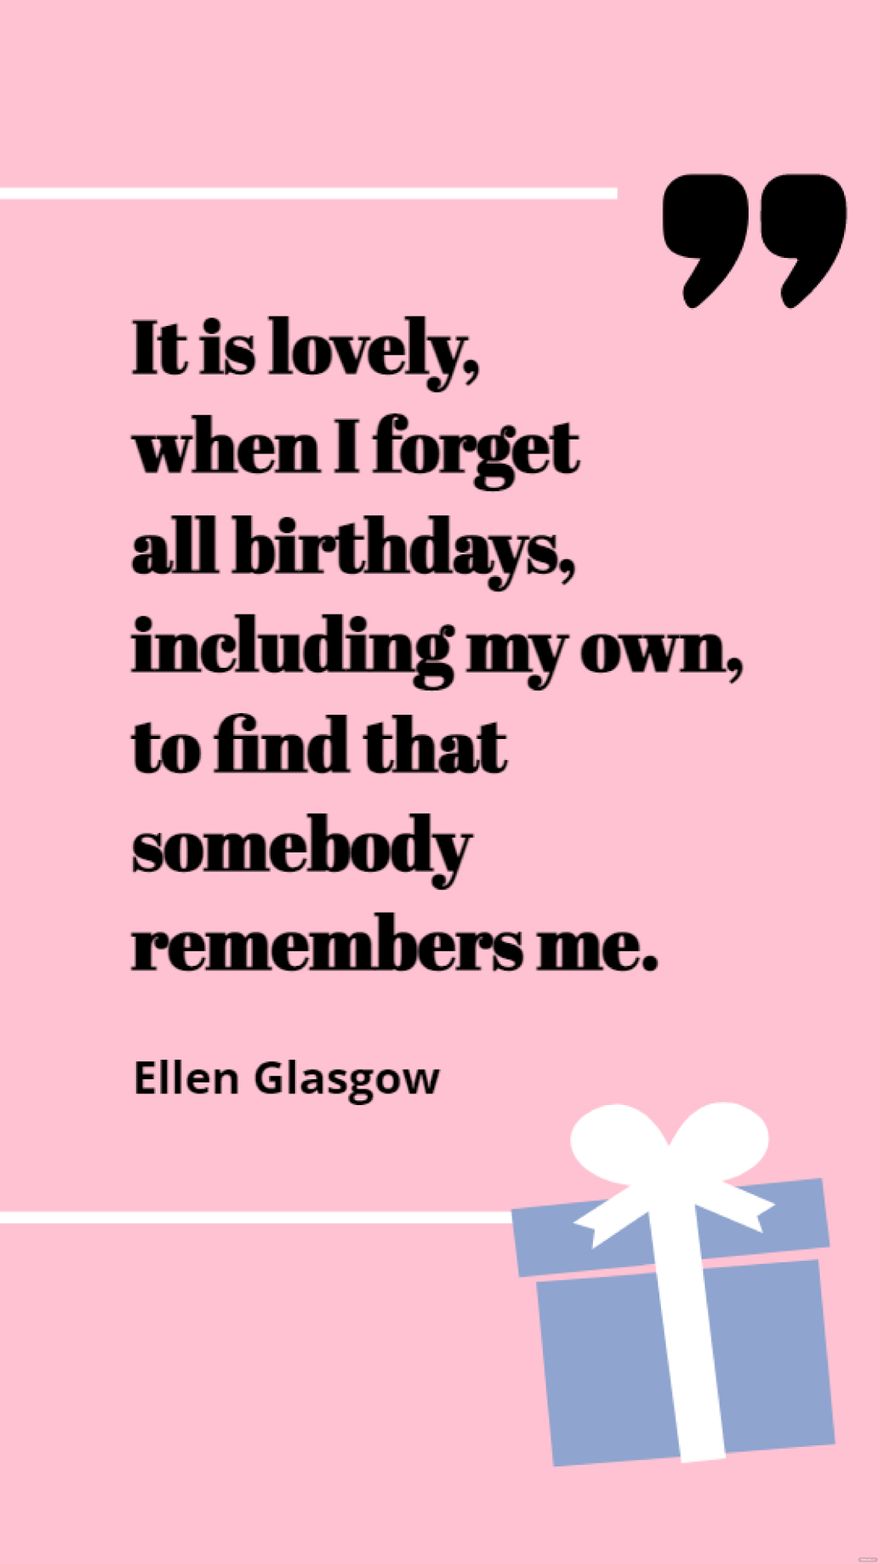 Free Ellen Glasgow - It is lovely, when I forget all birthdays, including my own, to find that somebody remembers me. in JPG